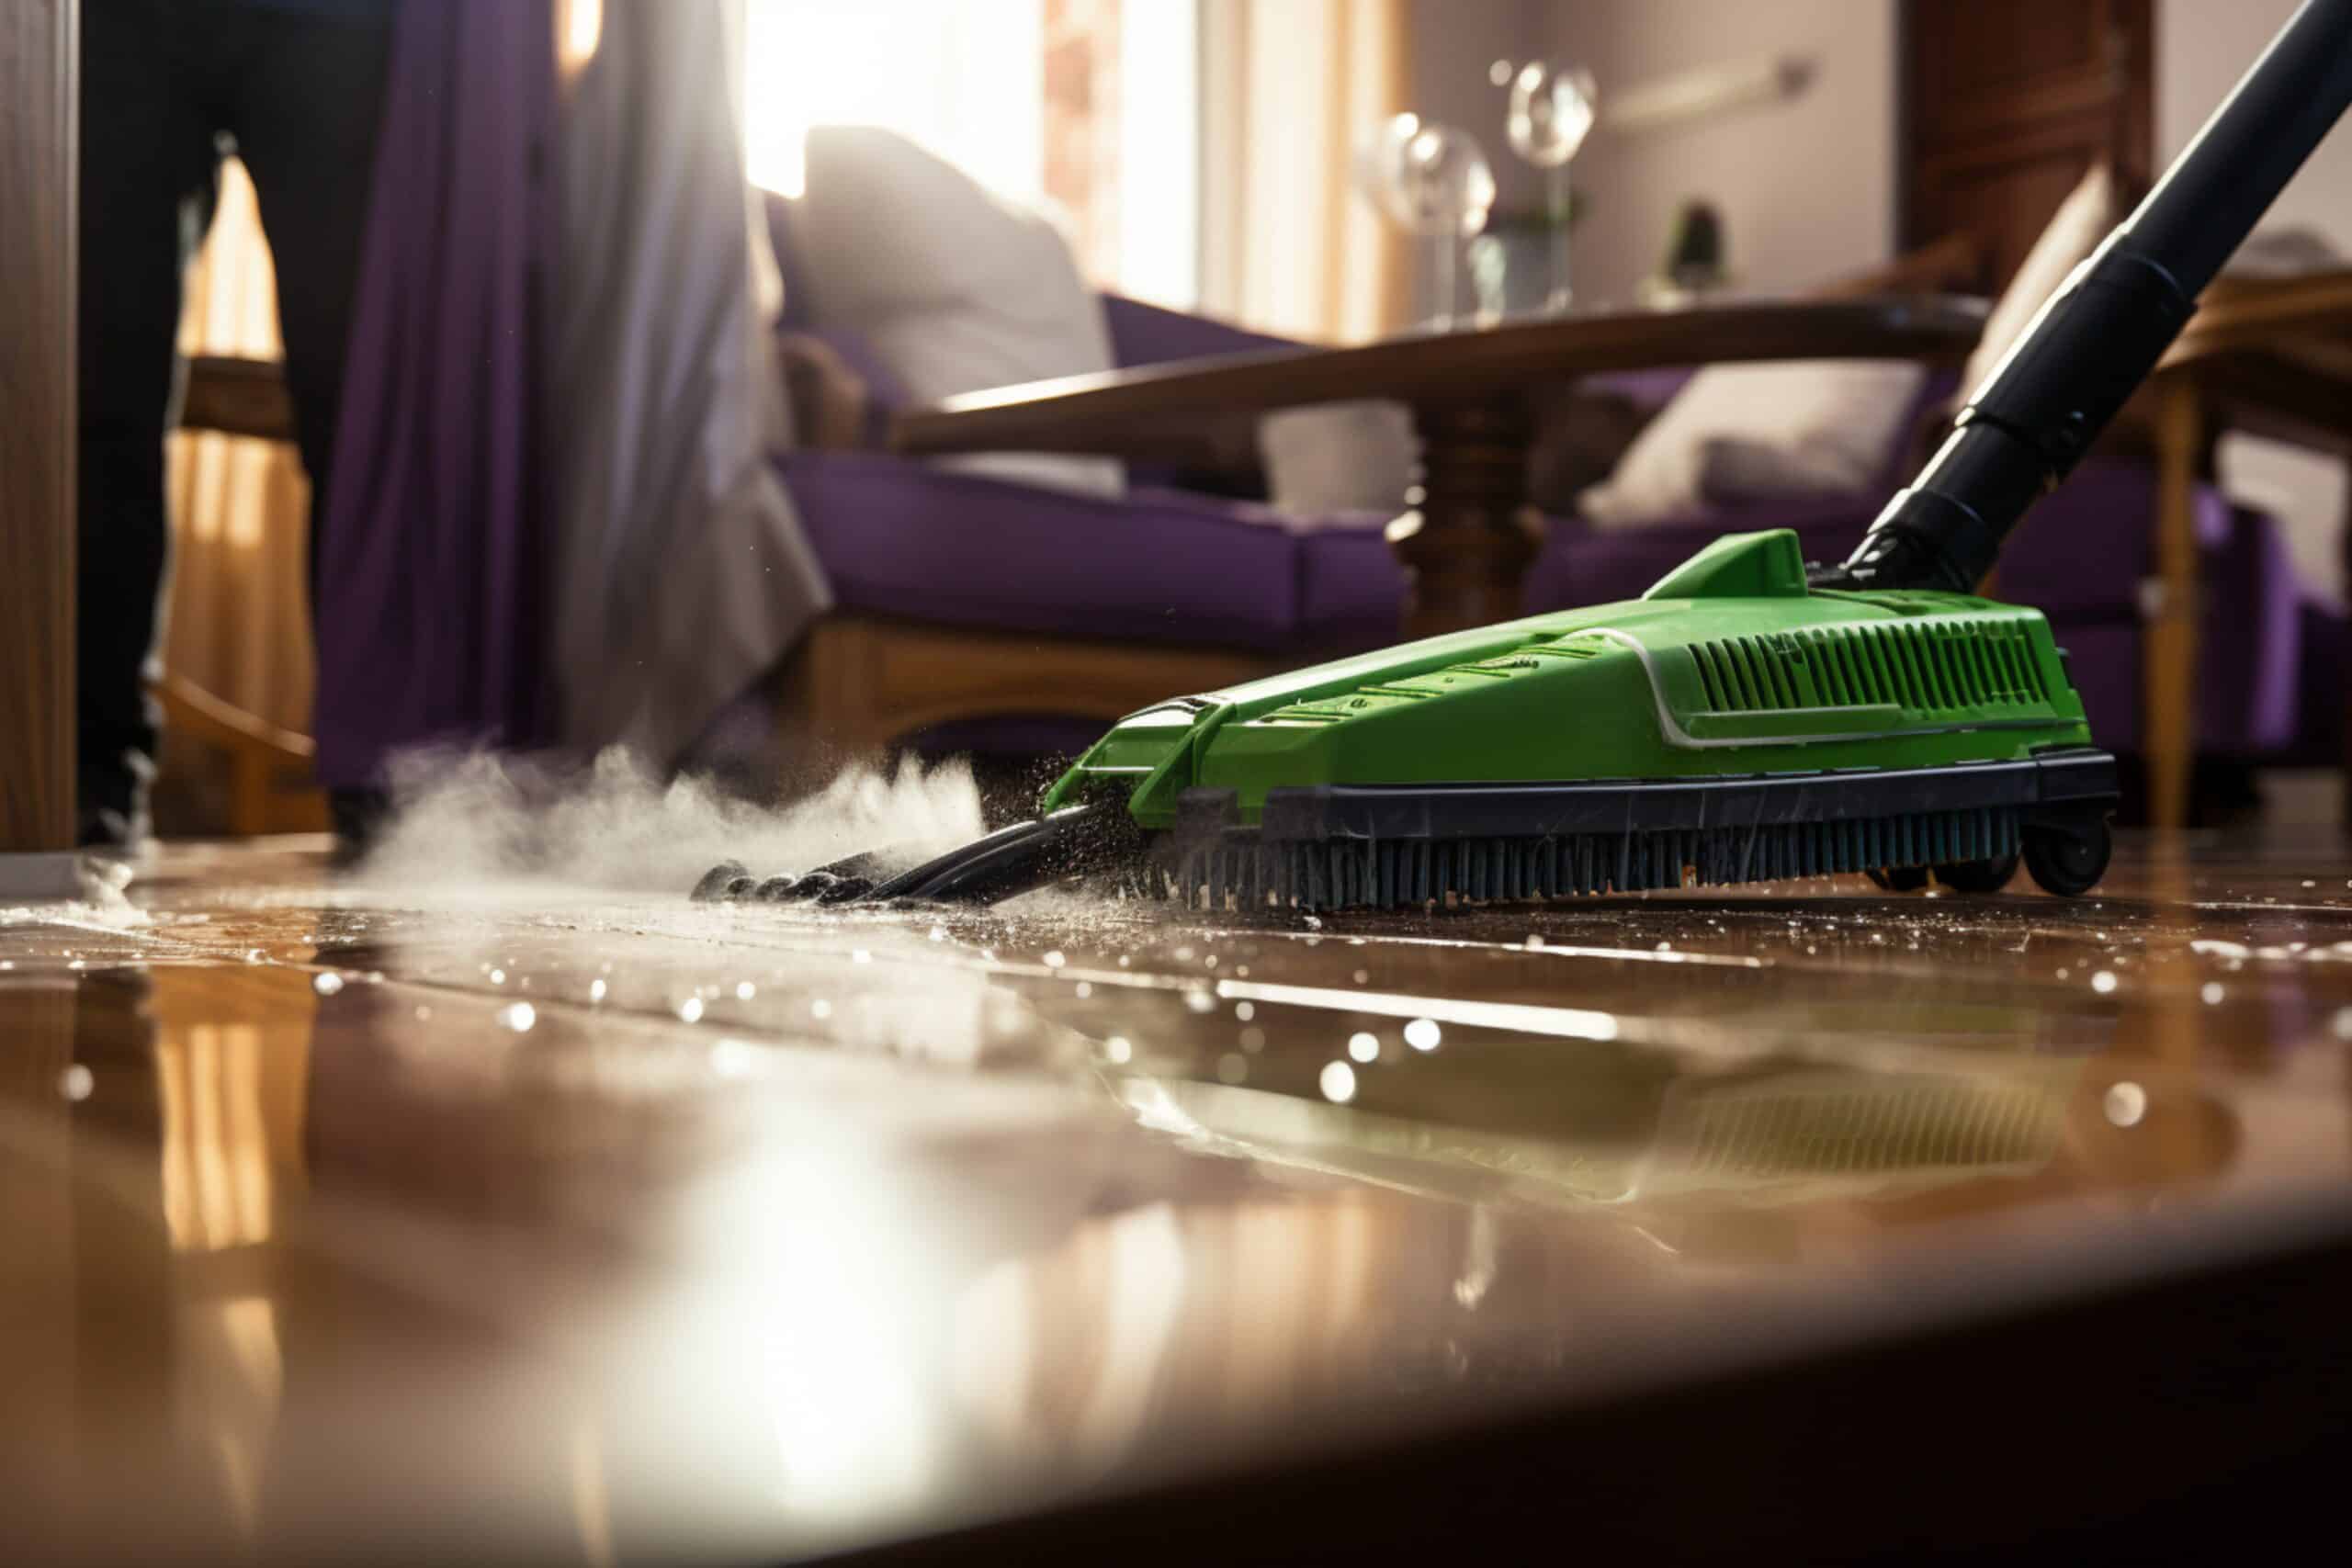 www.appr.com : Are there any specific maintenance or cleaning routines for steam cleaners?